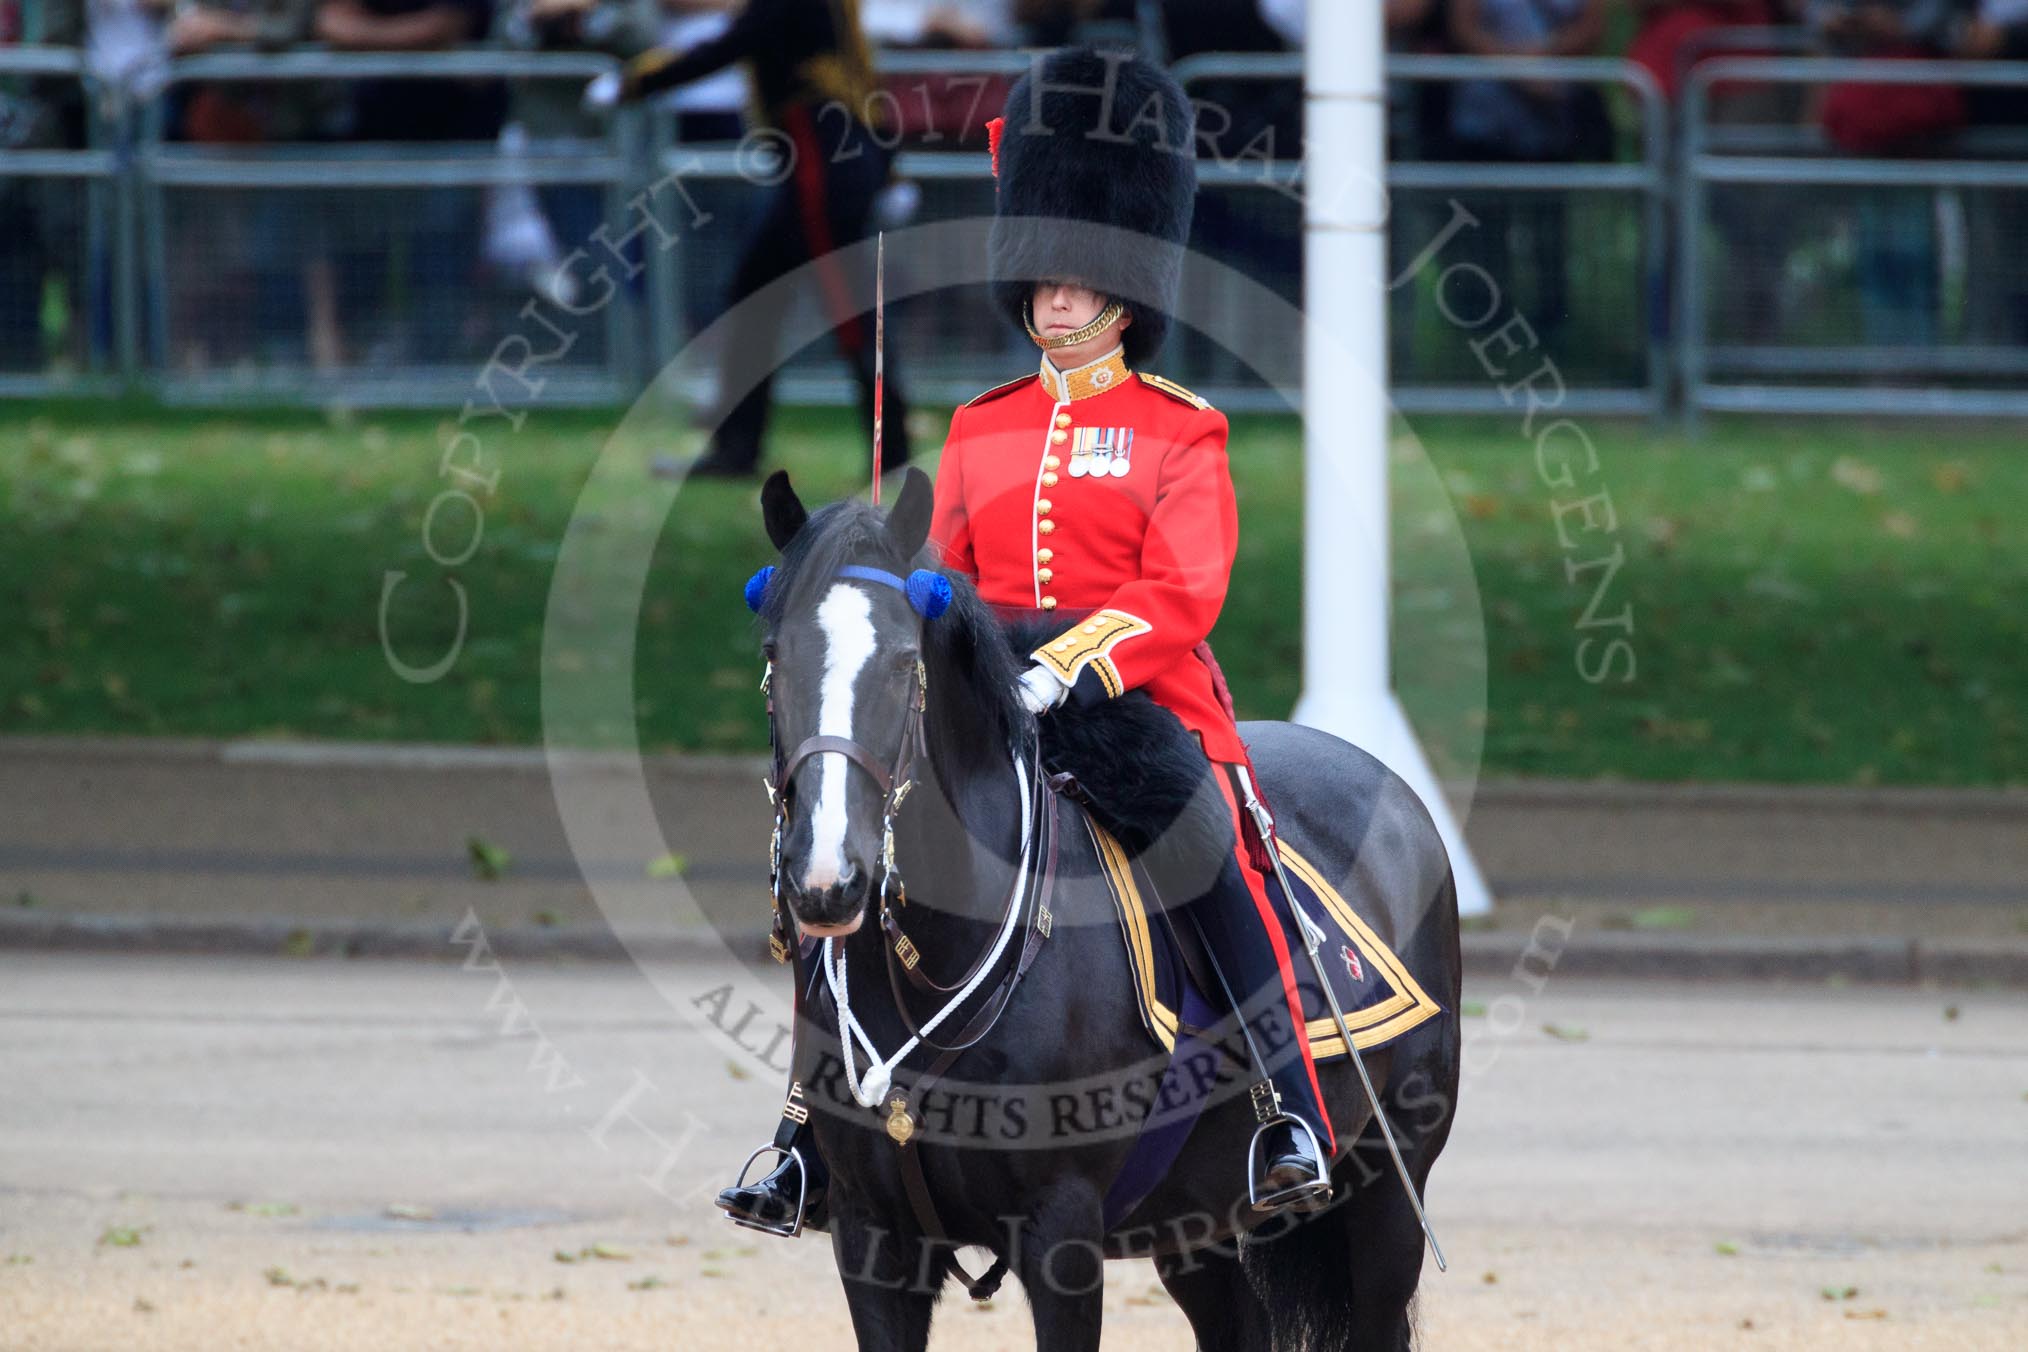 during The Colonel's Review {iptcyear4} (final rehearsal for Trooping the Colour, The Queen's Birthday Parade)  at Horse Guards Parade, Westminster, London, 2 June 2018, 10:43.